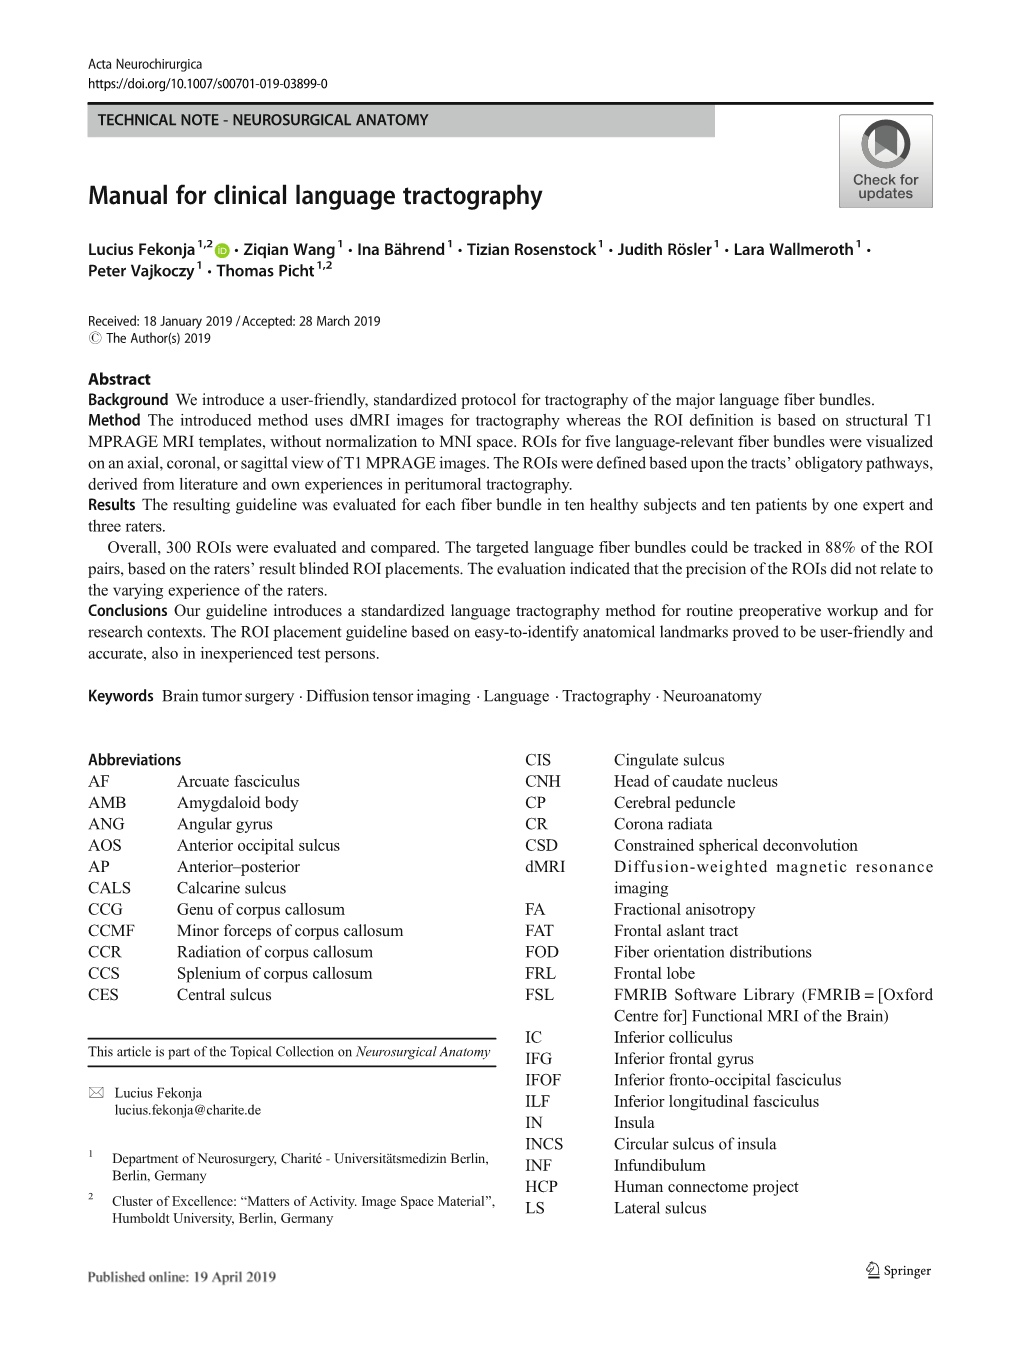 Manual for Clinical Language Tractography